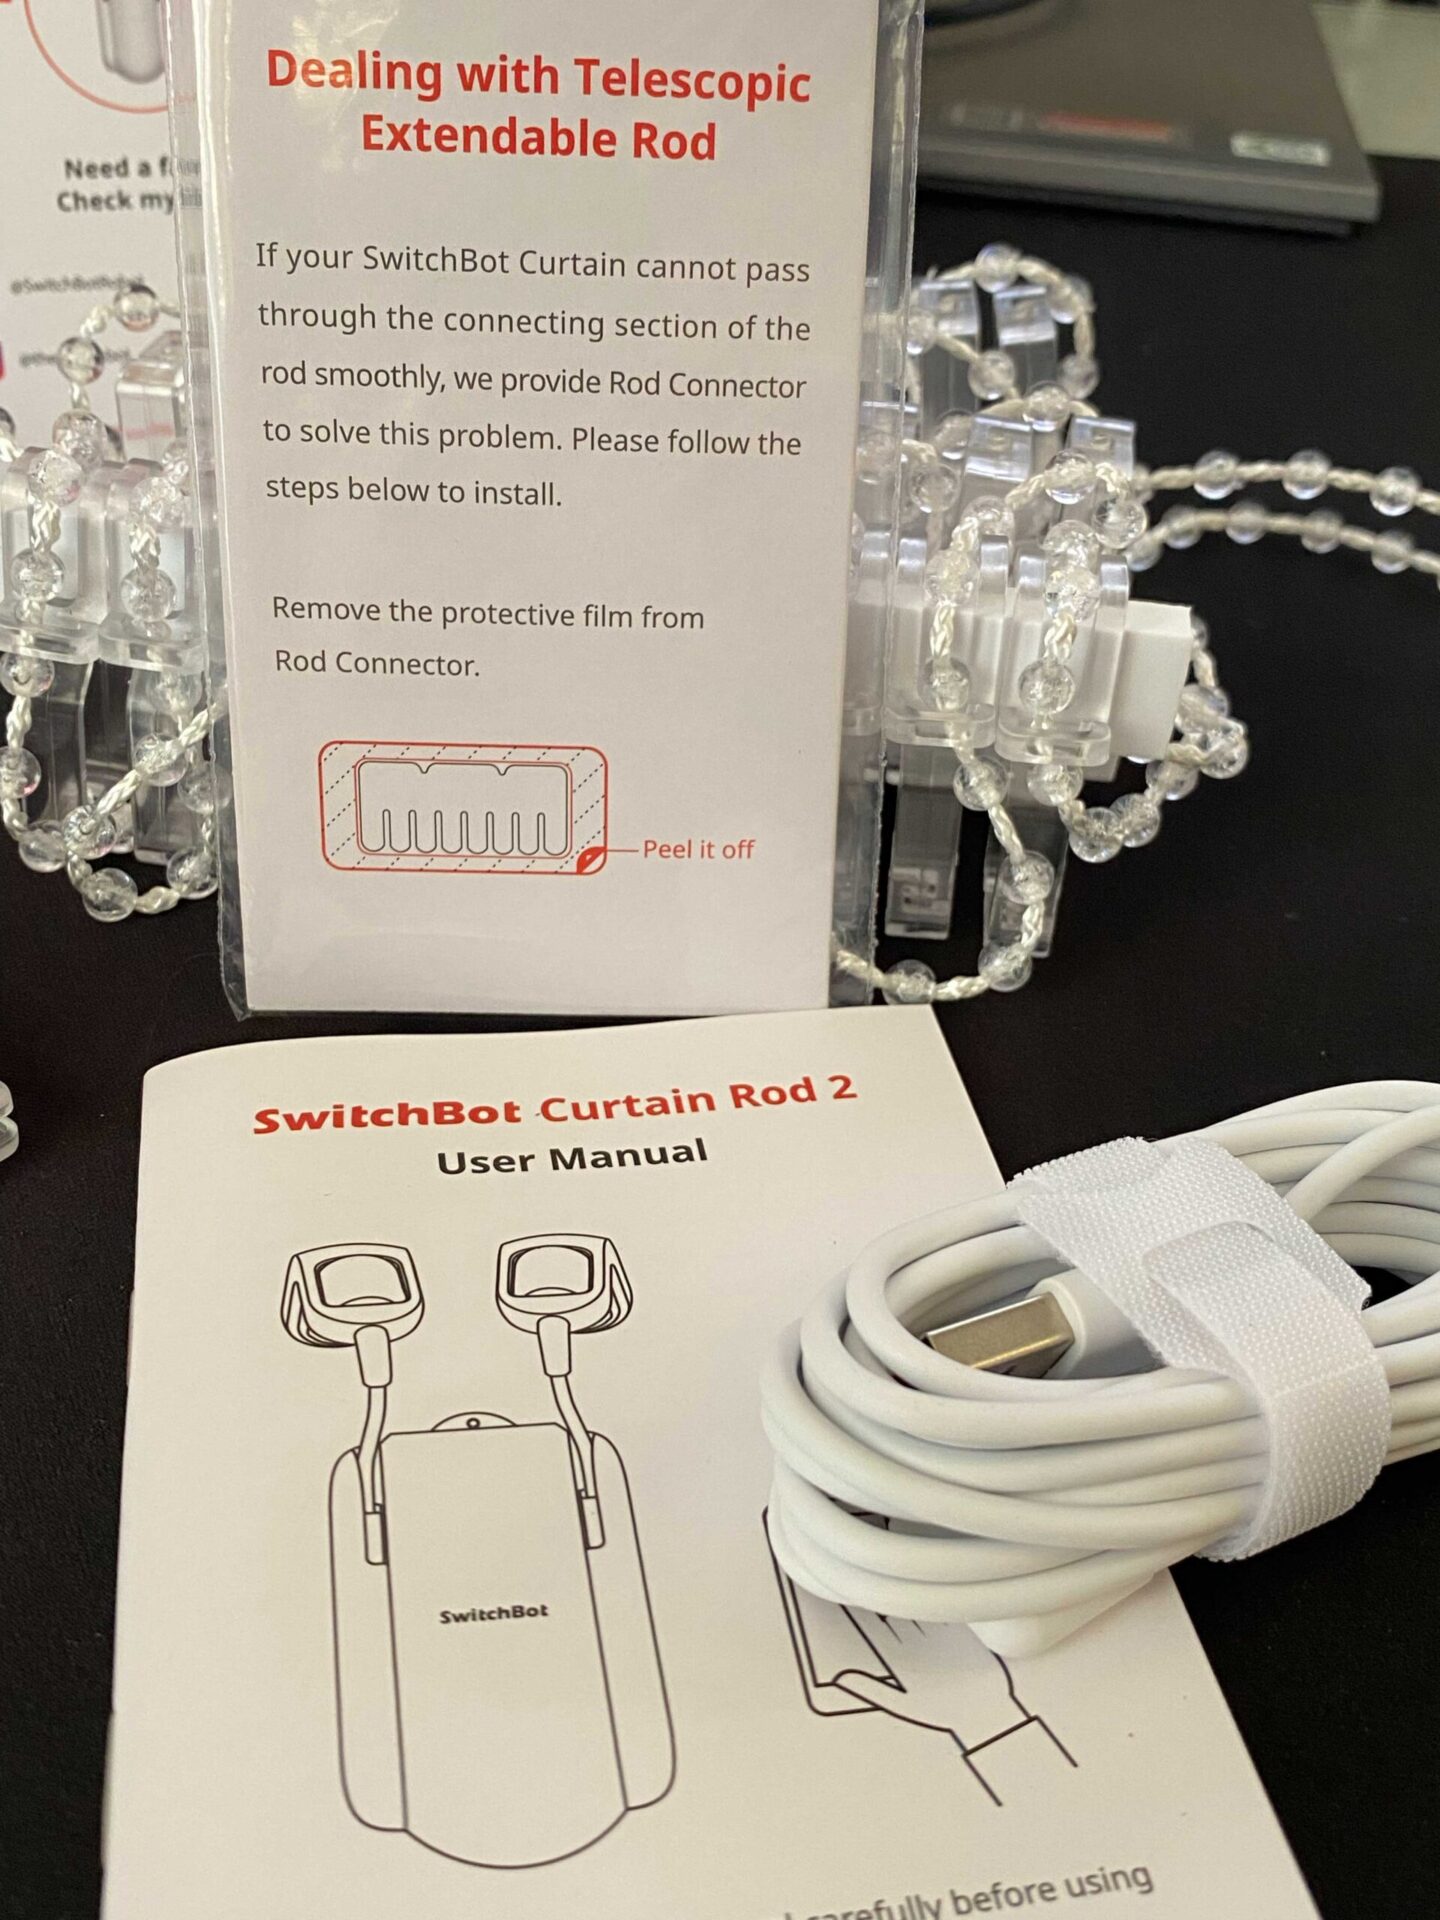 SwitchBot Curtain user manual and charging cable